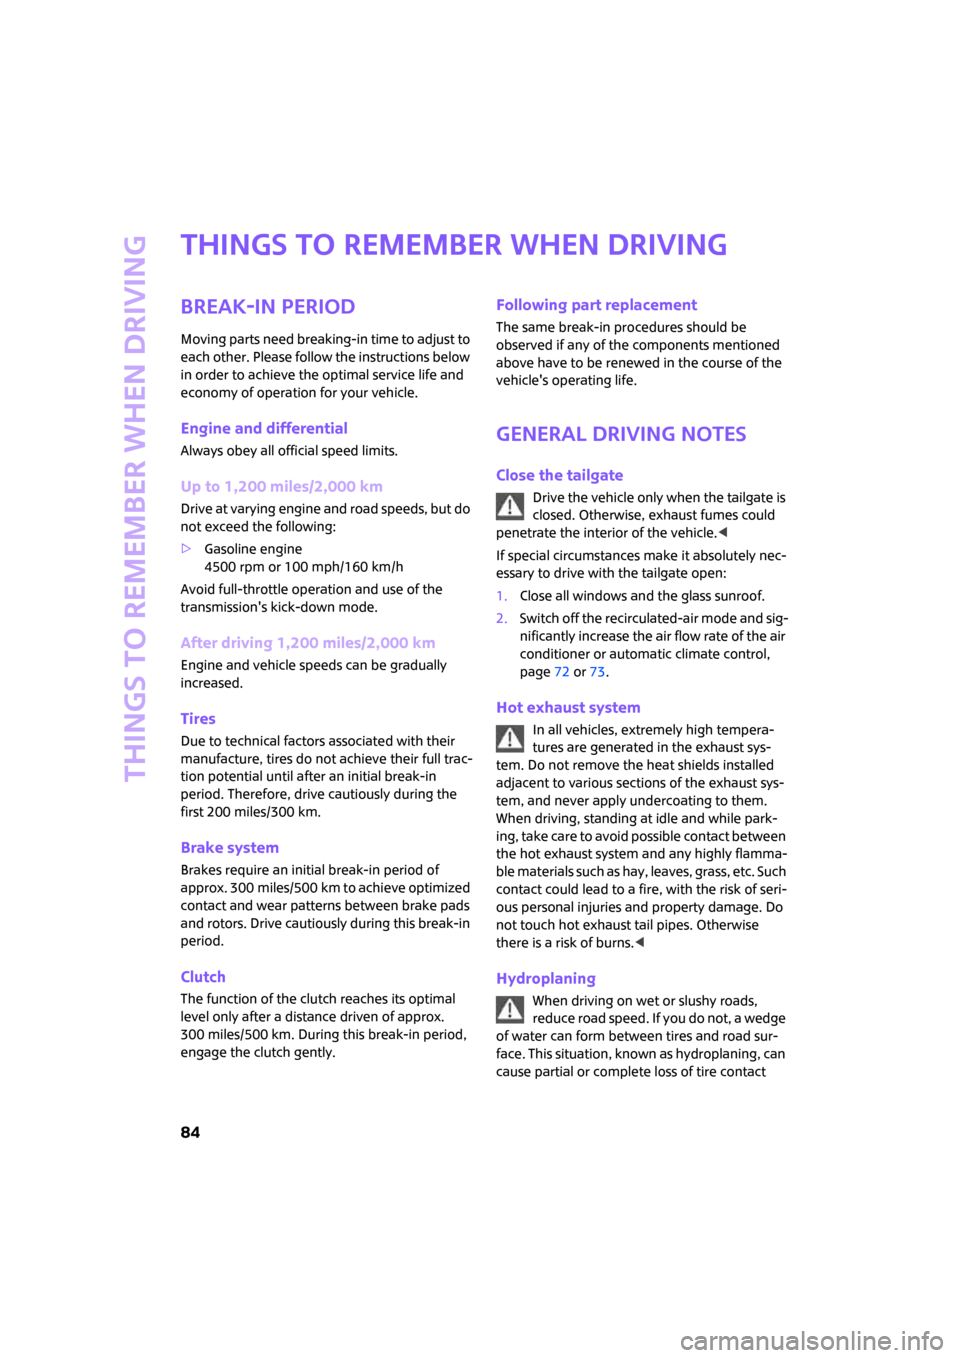 MINI Clubman 2008 Manual Online Things to remember when driving
84
Things to remember when driving
Break-in period
Moving parts need breaking-in time to adjust to 
each other. Please follow the instructions below 
in order to achiev